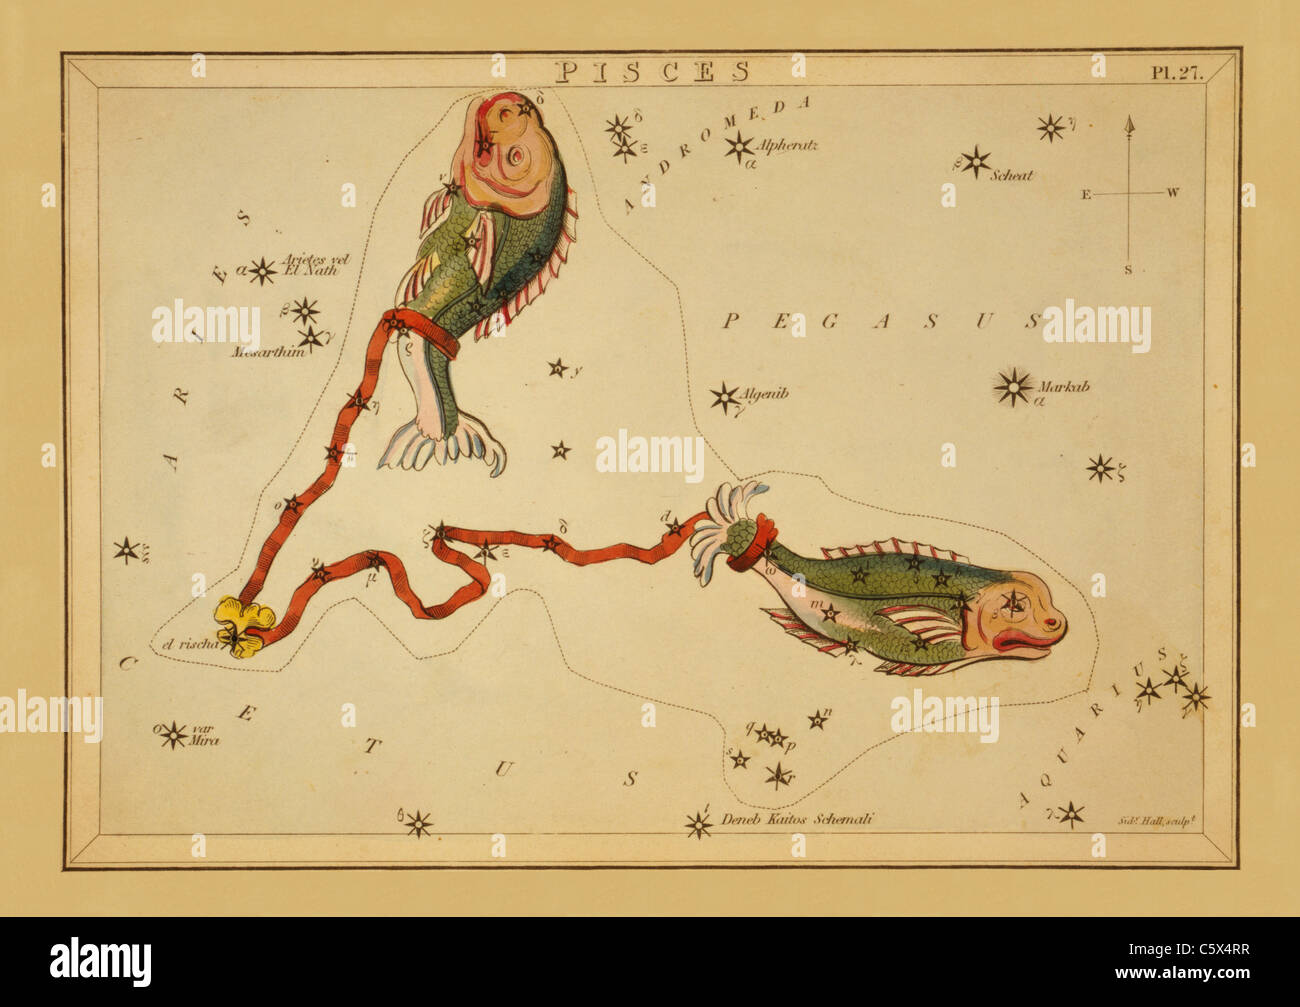 Pisces - 1825 Astronomical Chart Stock Photo